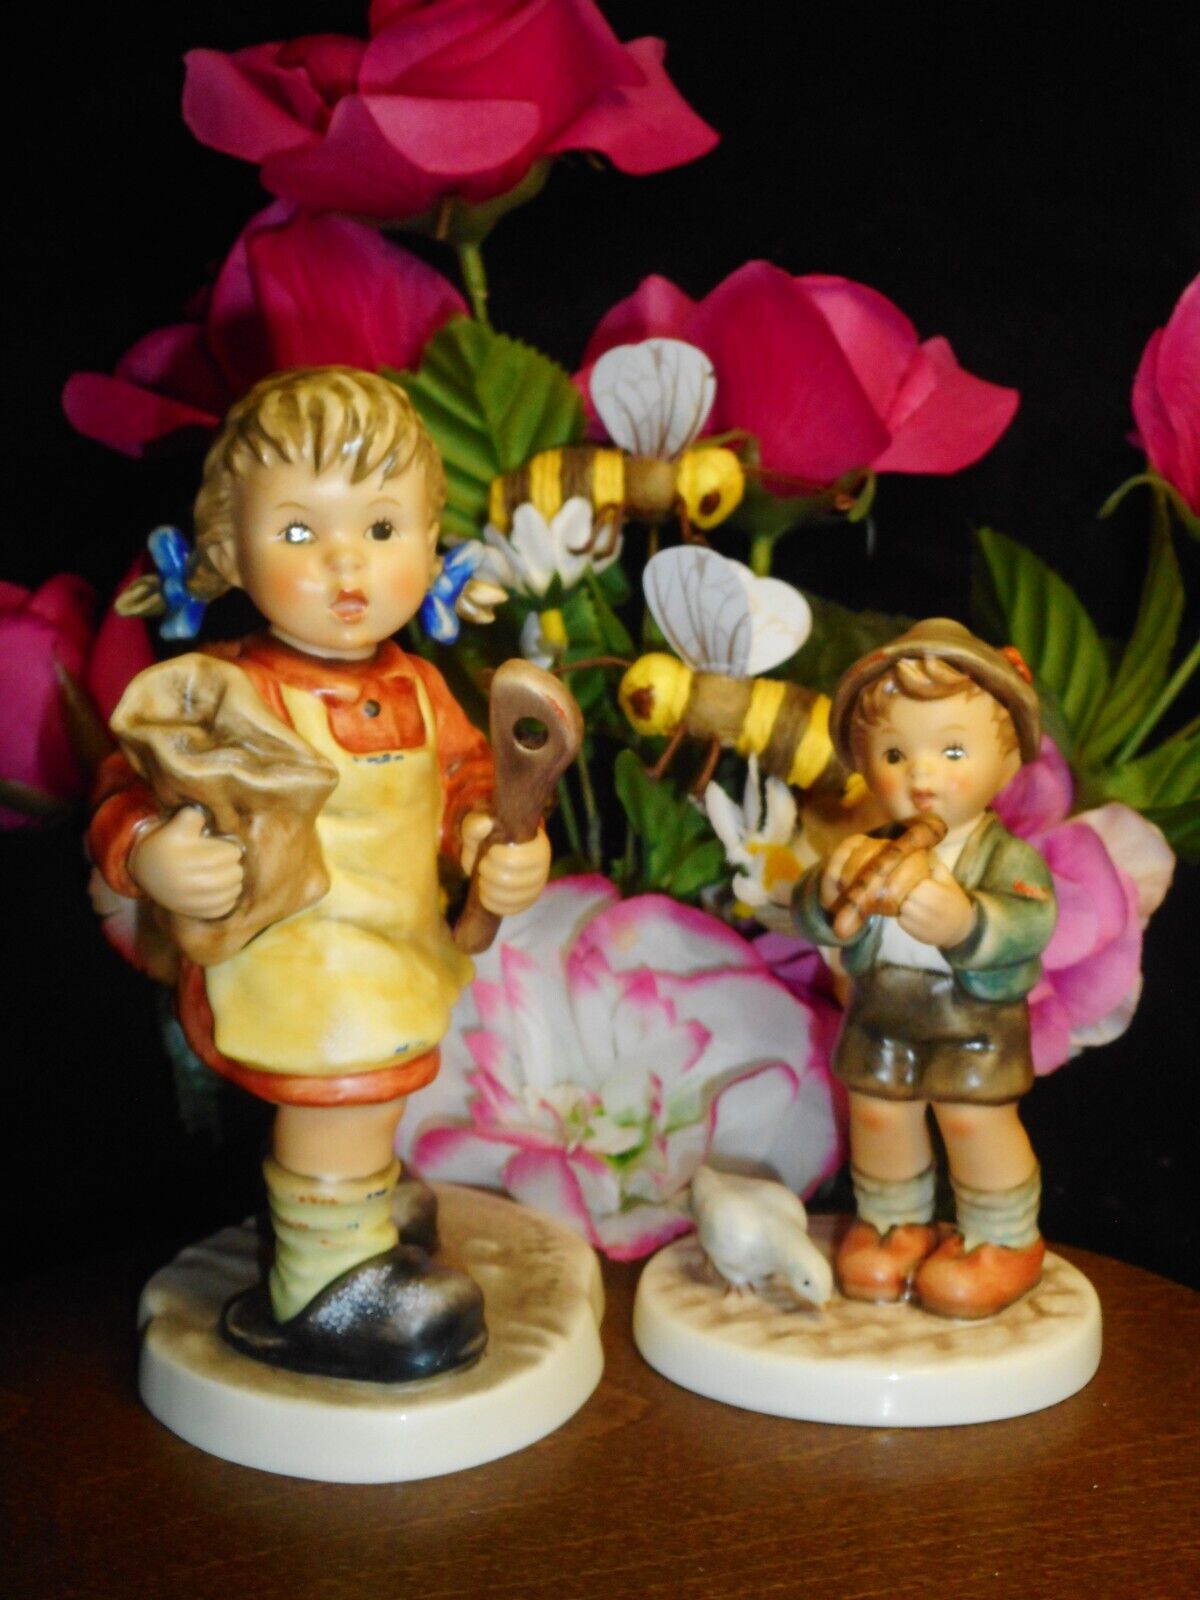 2 HUMMEL FIGURINES MIXING THE CAKE 2167 FIRST ISSUE & 2425 MAX 2019/20 CLUB MINT